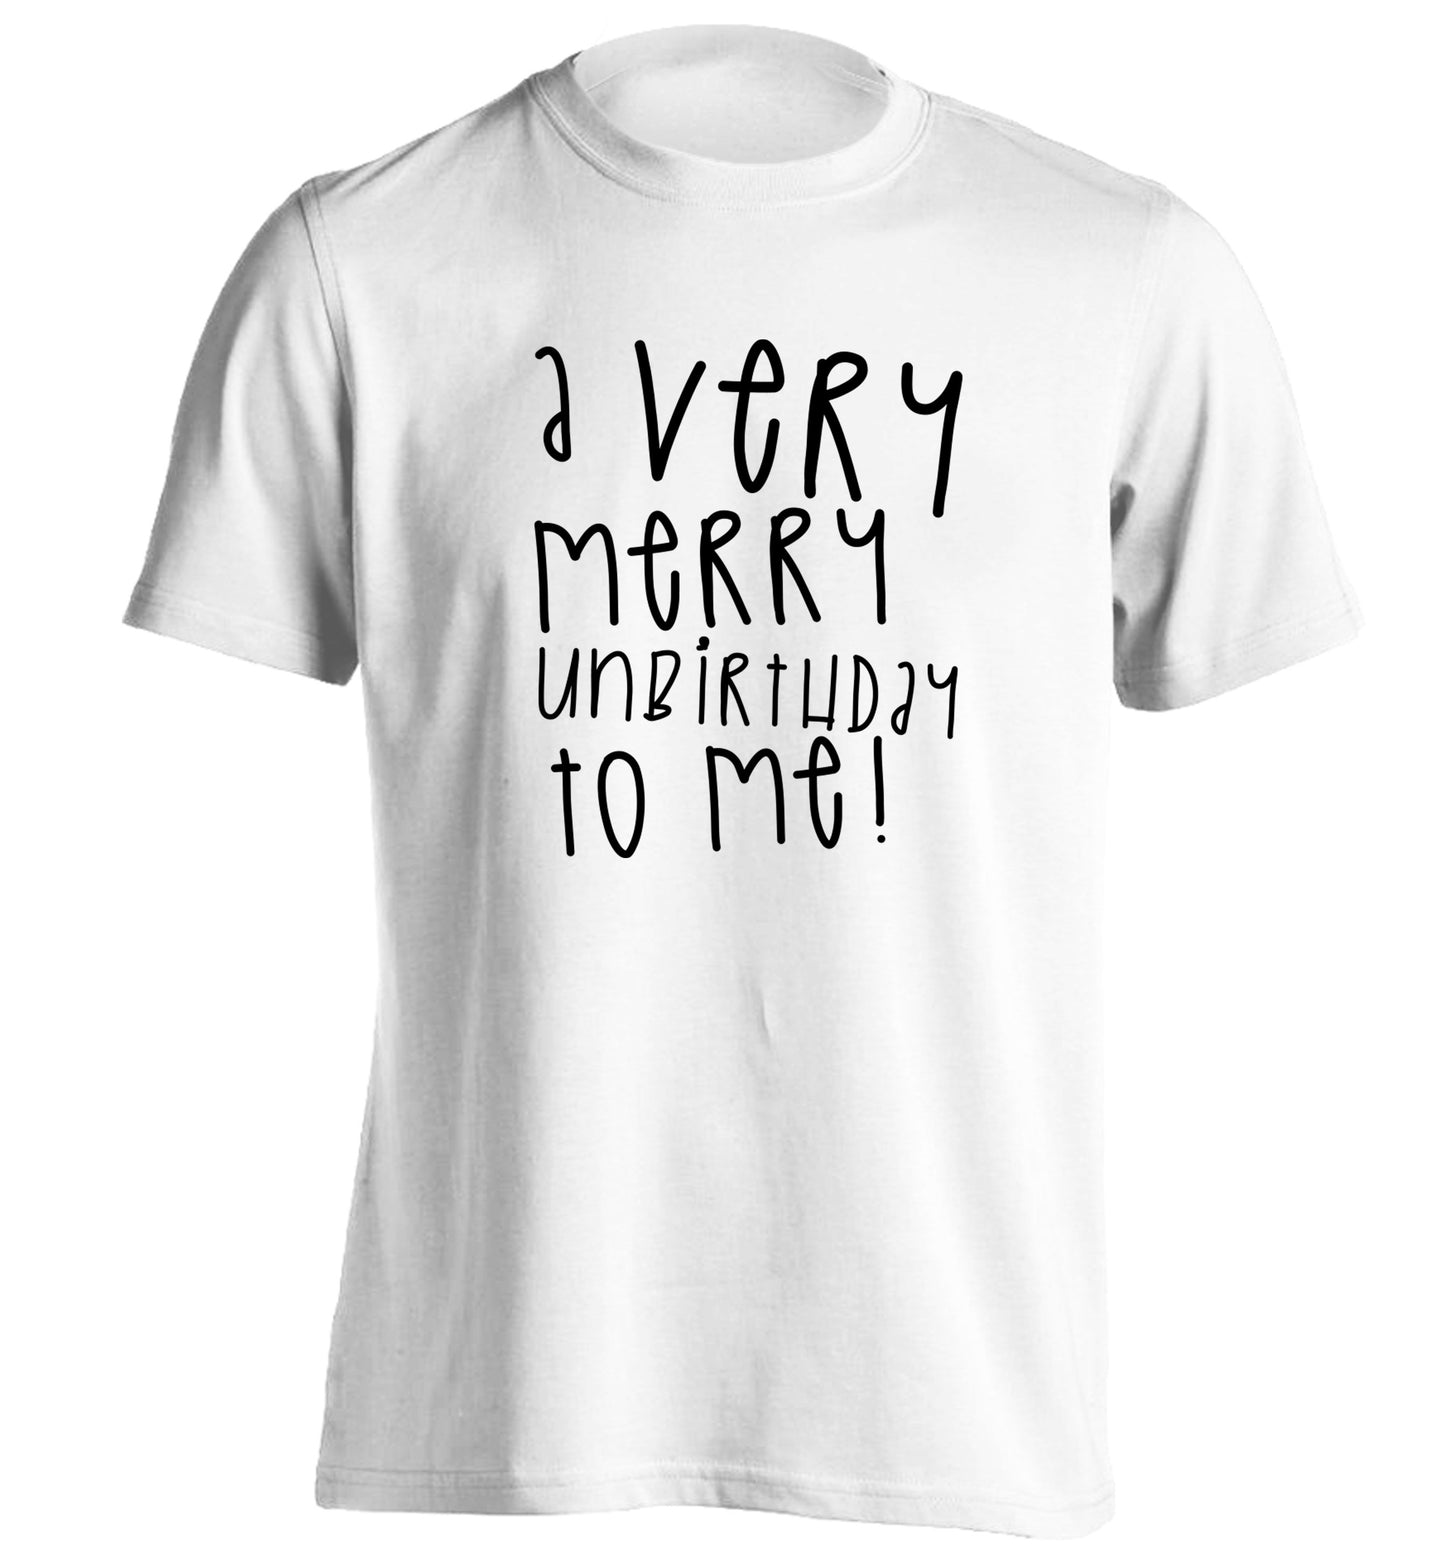 A very merry unbirthday to me! adults unisex white Tshirt 2XL